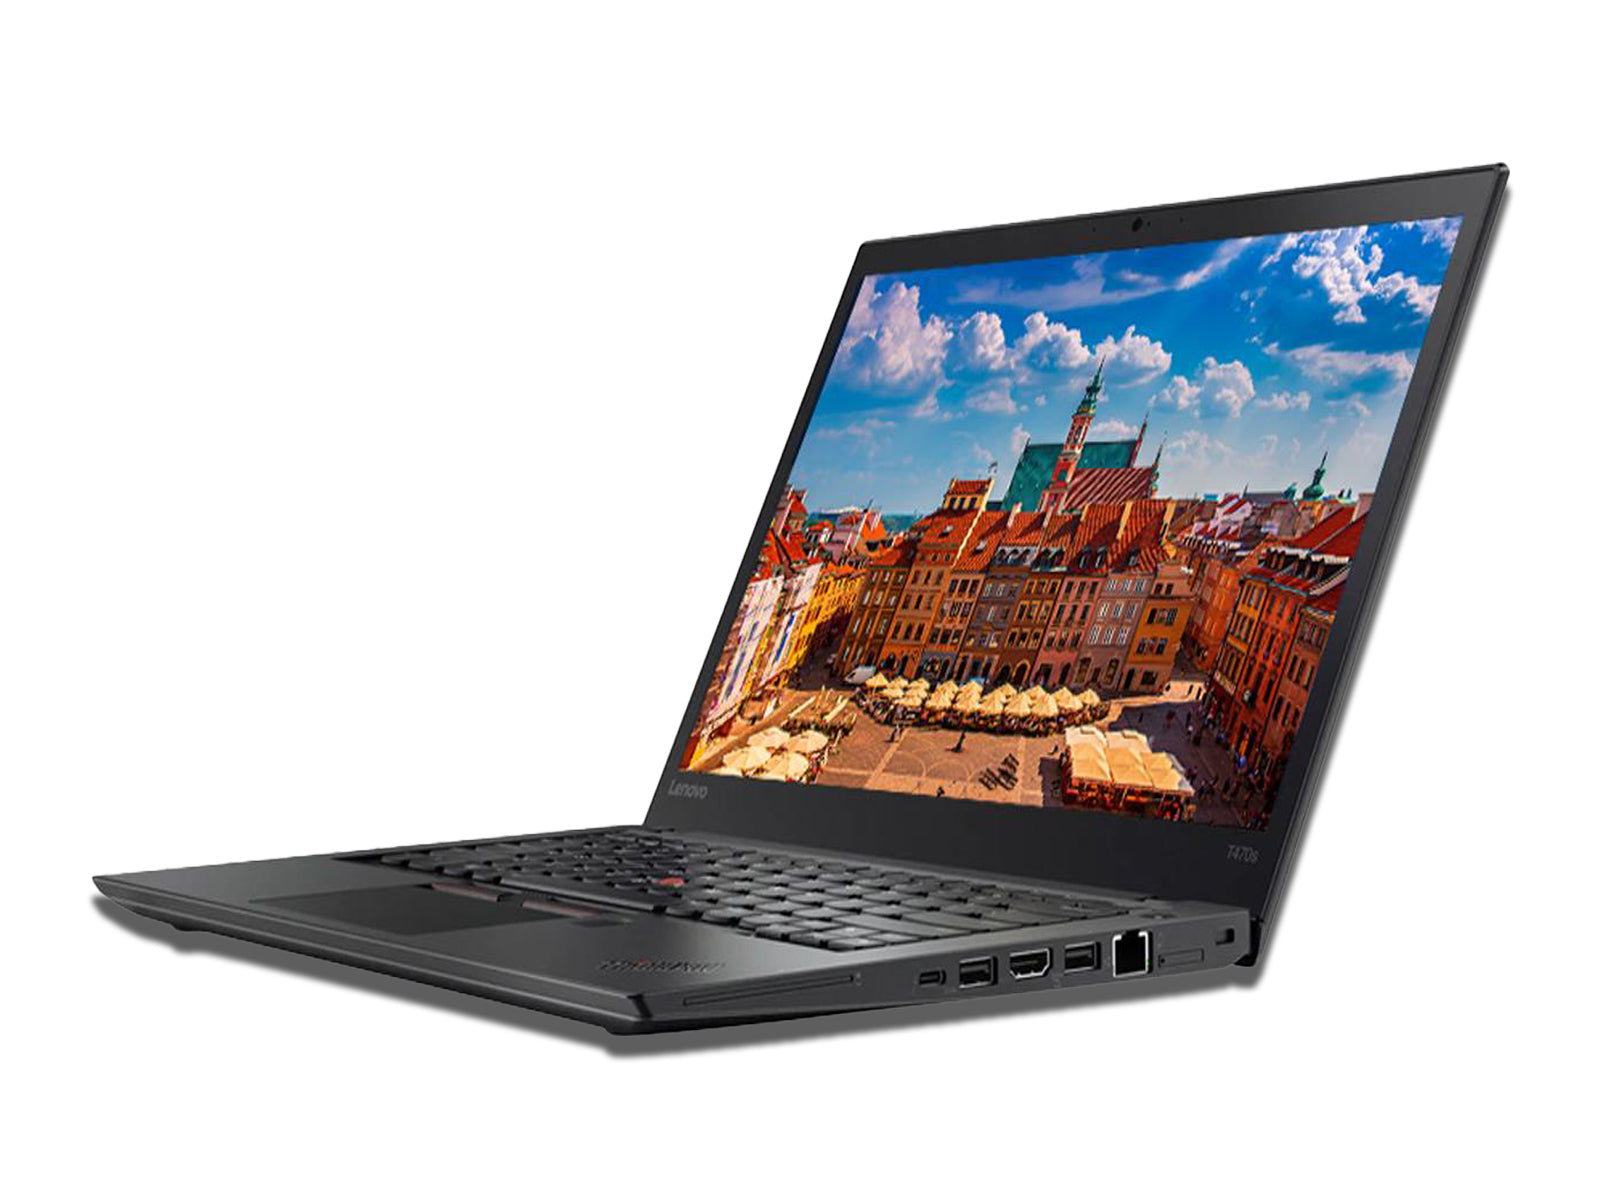 Image Showing Right Side View of The Lenovo T470's Laptop on The White Background